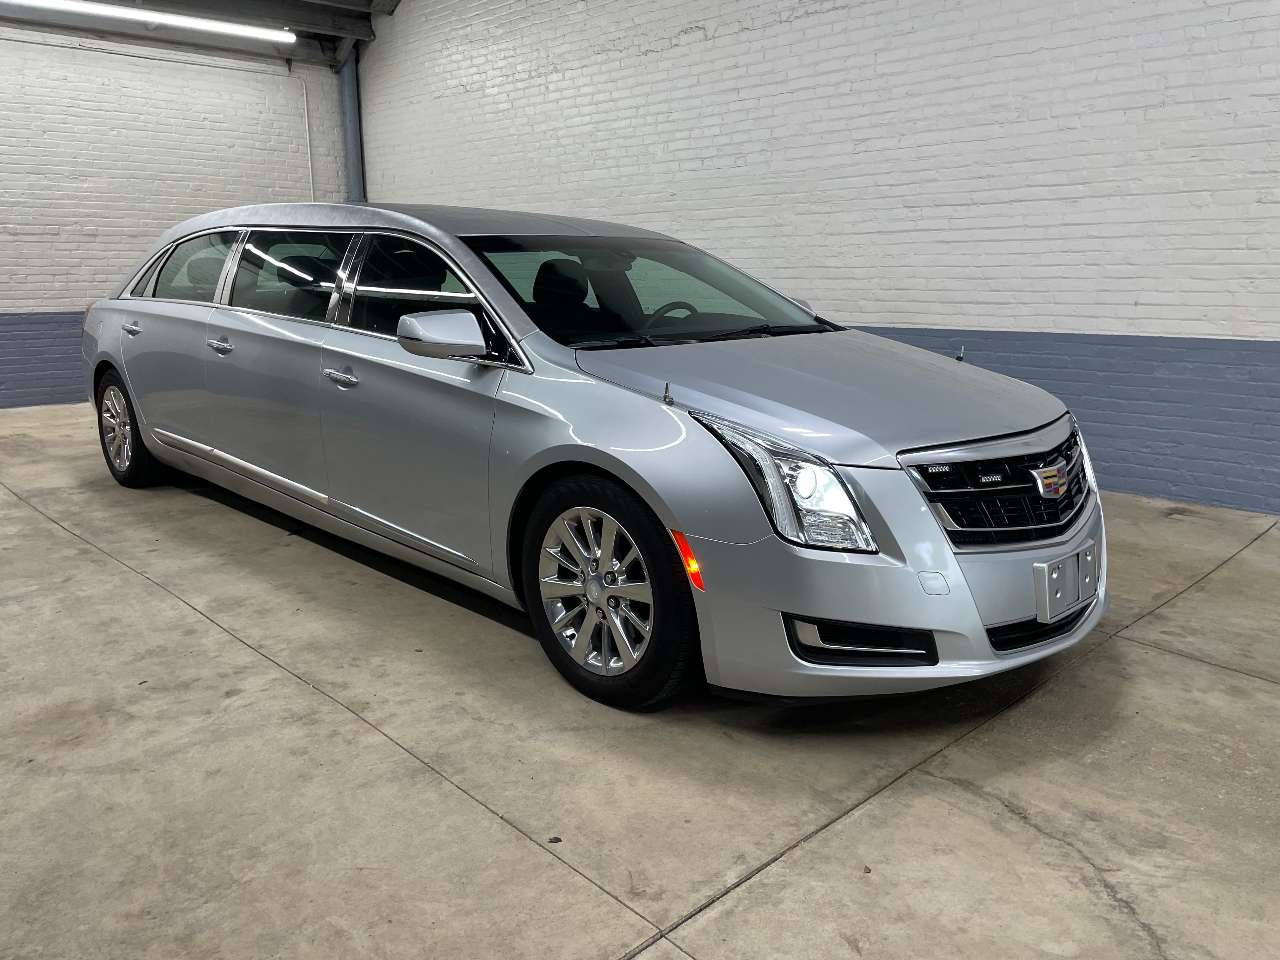 2017 Cadillac Armbruster Stageway XTS L6 Limousine 1659102139891